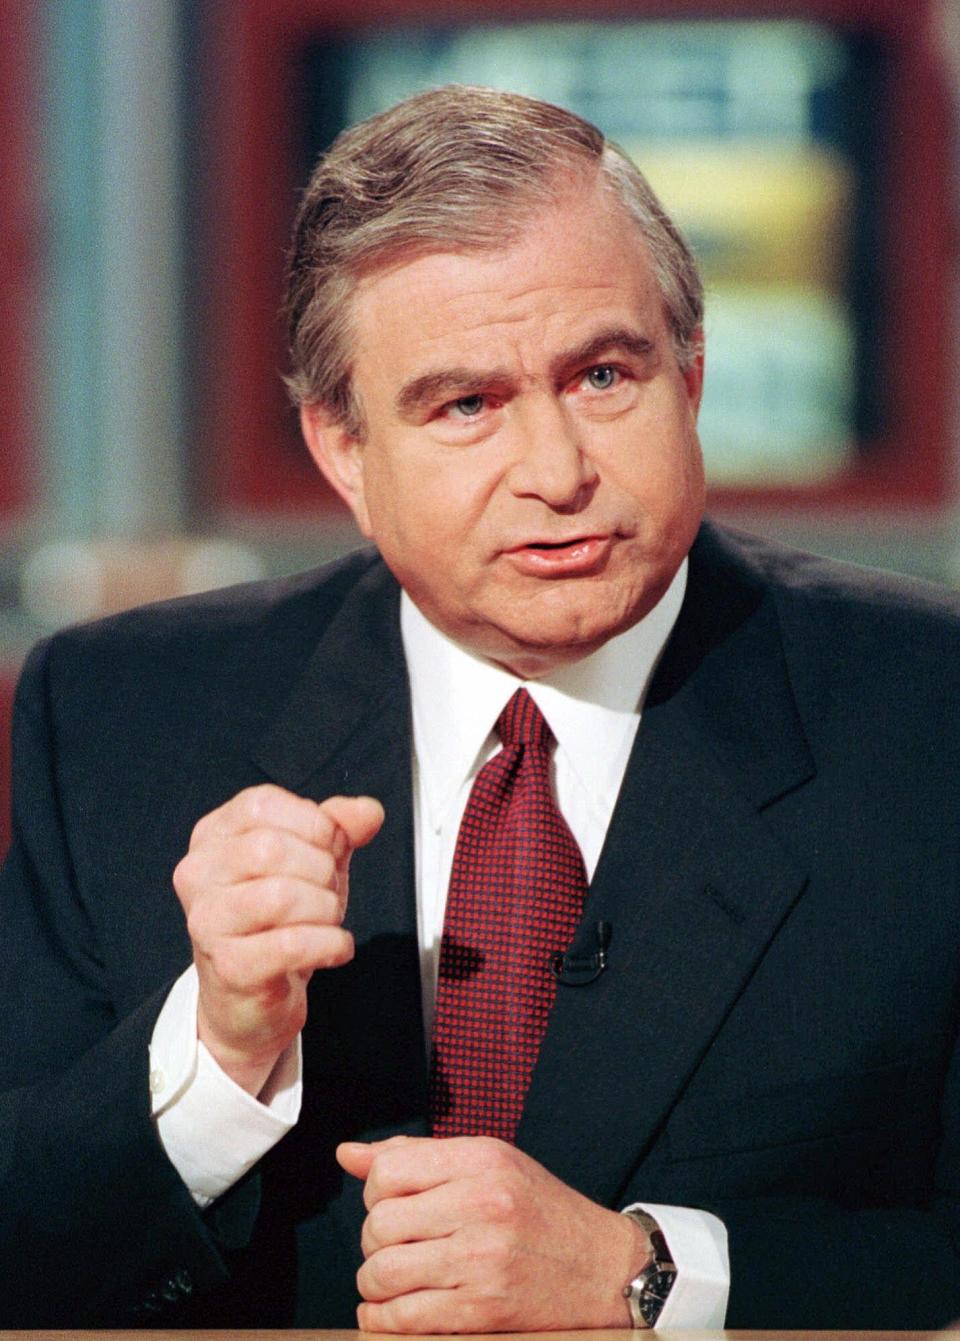 Sandy Berger, then National Security Adviser, discusses the easing of sanctions on North Korea during NBC's "Meet the Press" in Washington Sunday, Sept. 19, 1999.